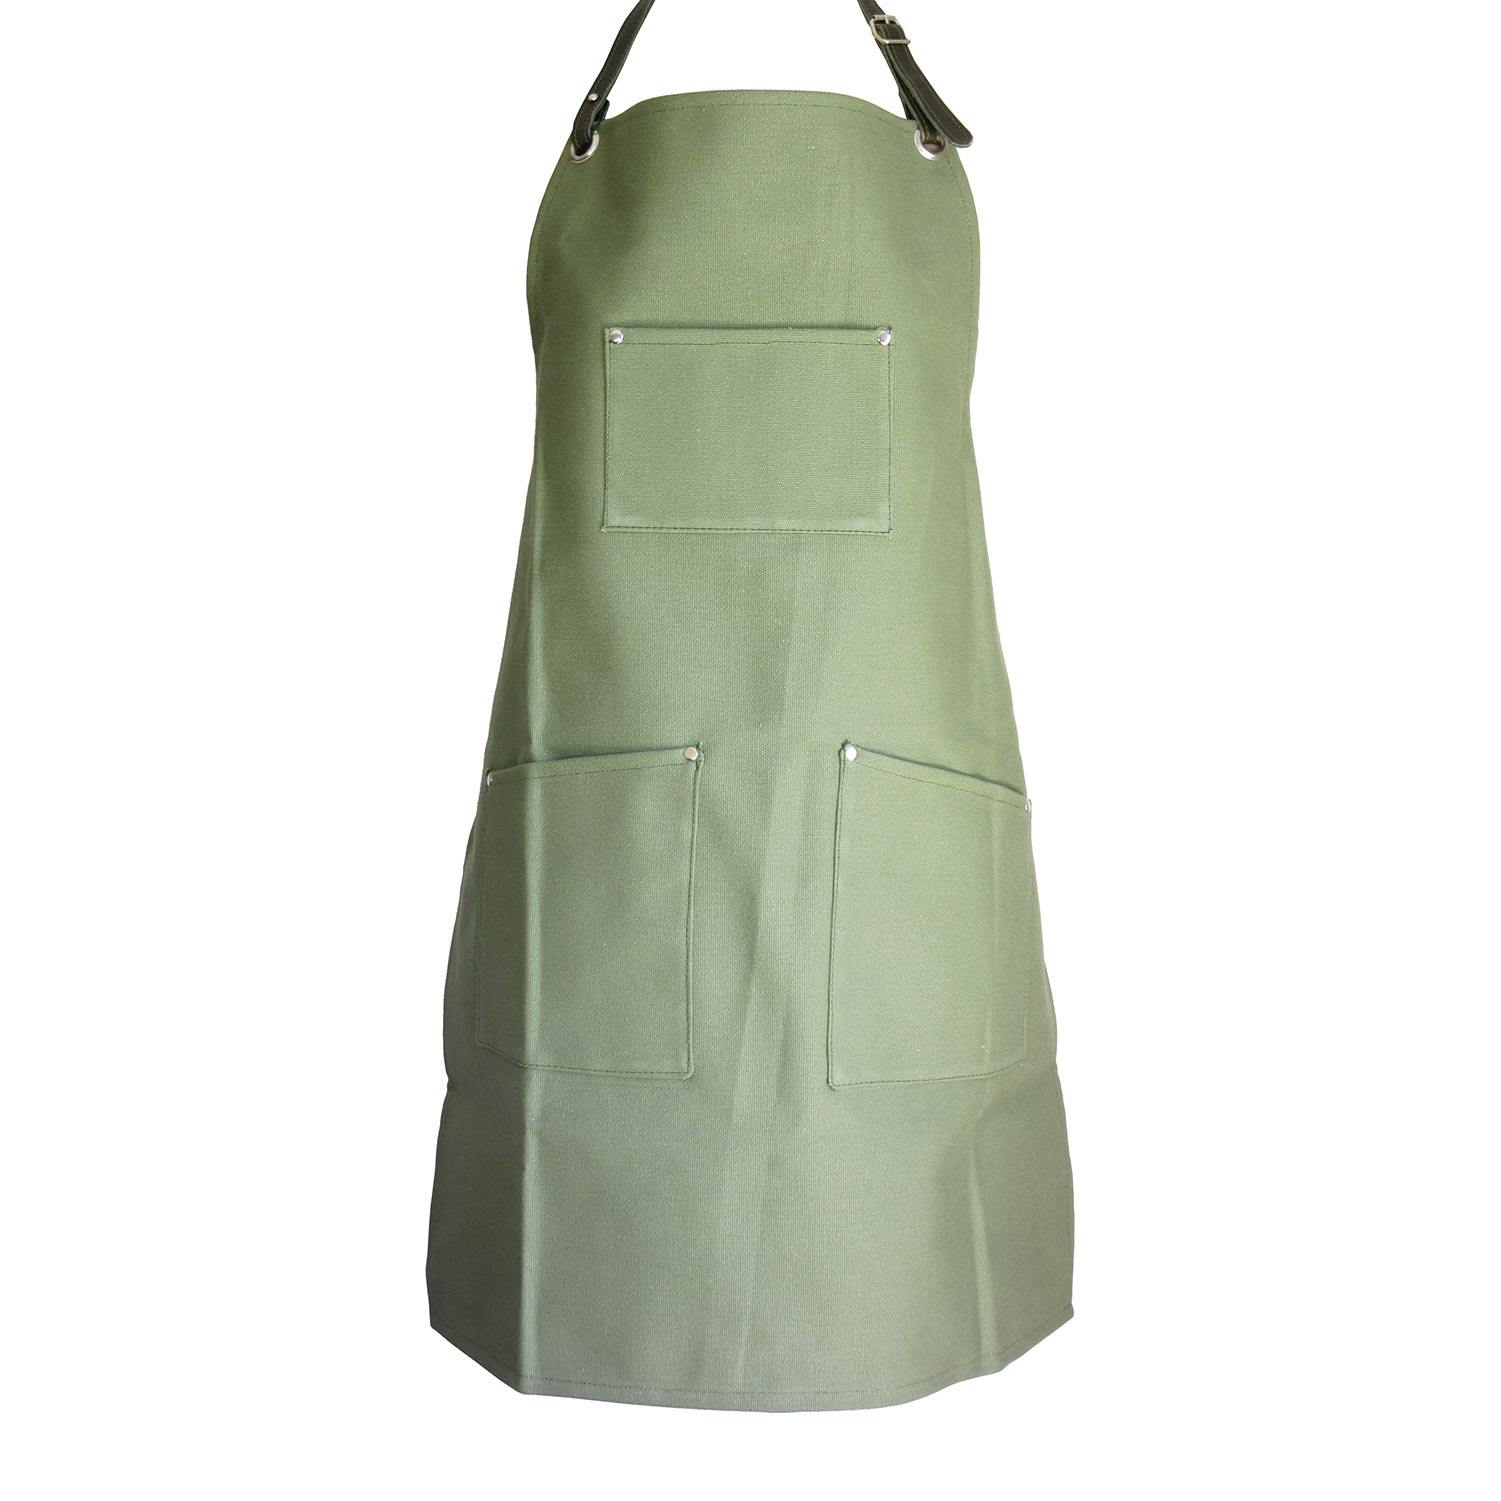 Woodheads Workmen's Canvas & Leather Aprons Aprons Woodheads green 